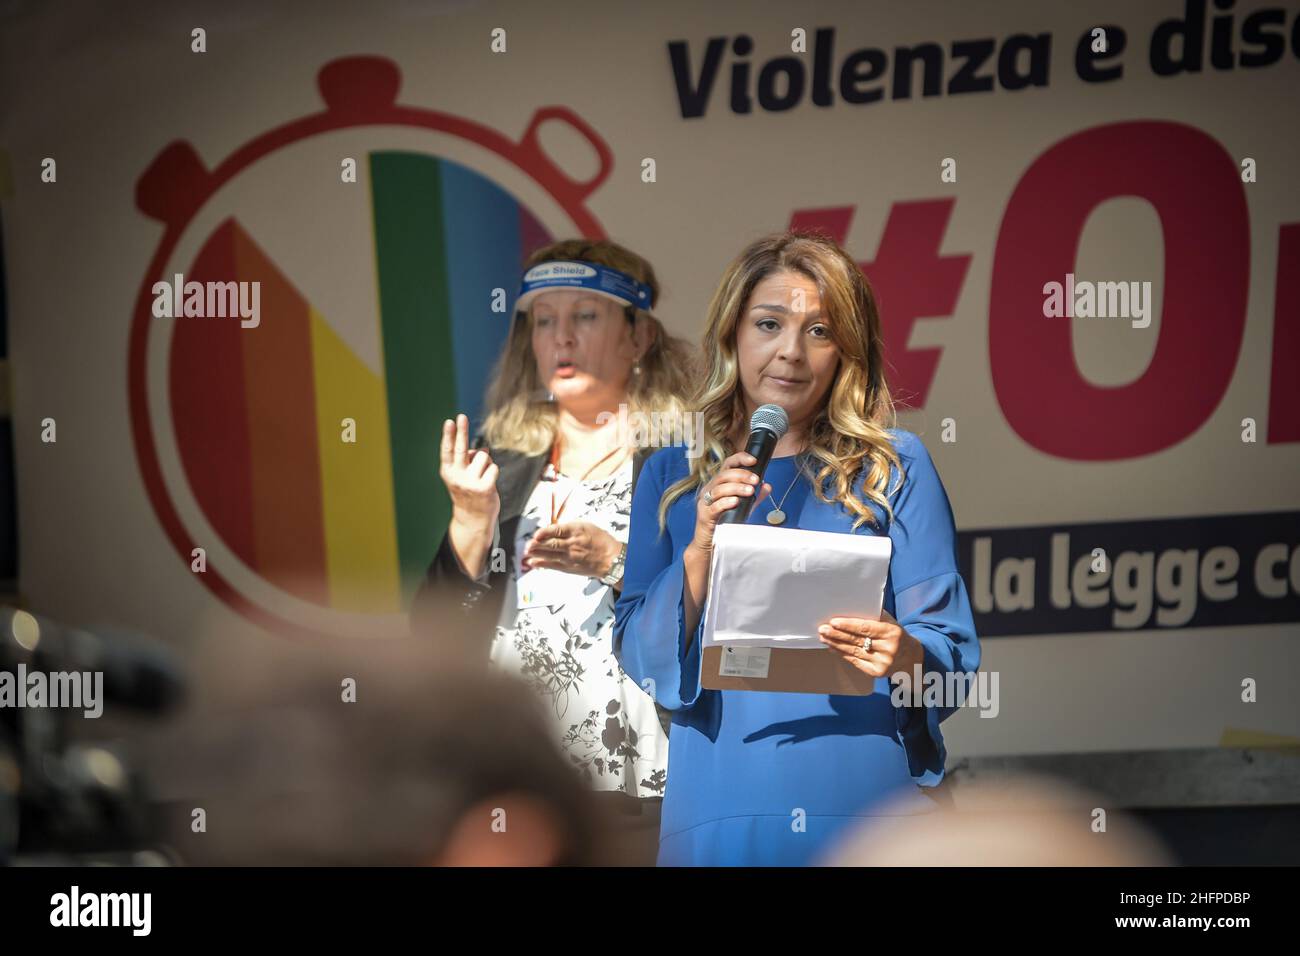 Claudio Furlan - LaPresse 10 October 2020 Milano (Italy) News Ora Basta! demonstration organized by lgbt rights movements for the approval of the Zan law on transphobia Stock Photo